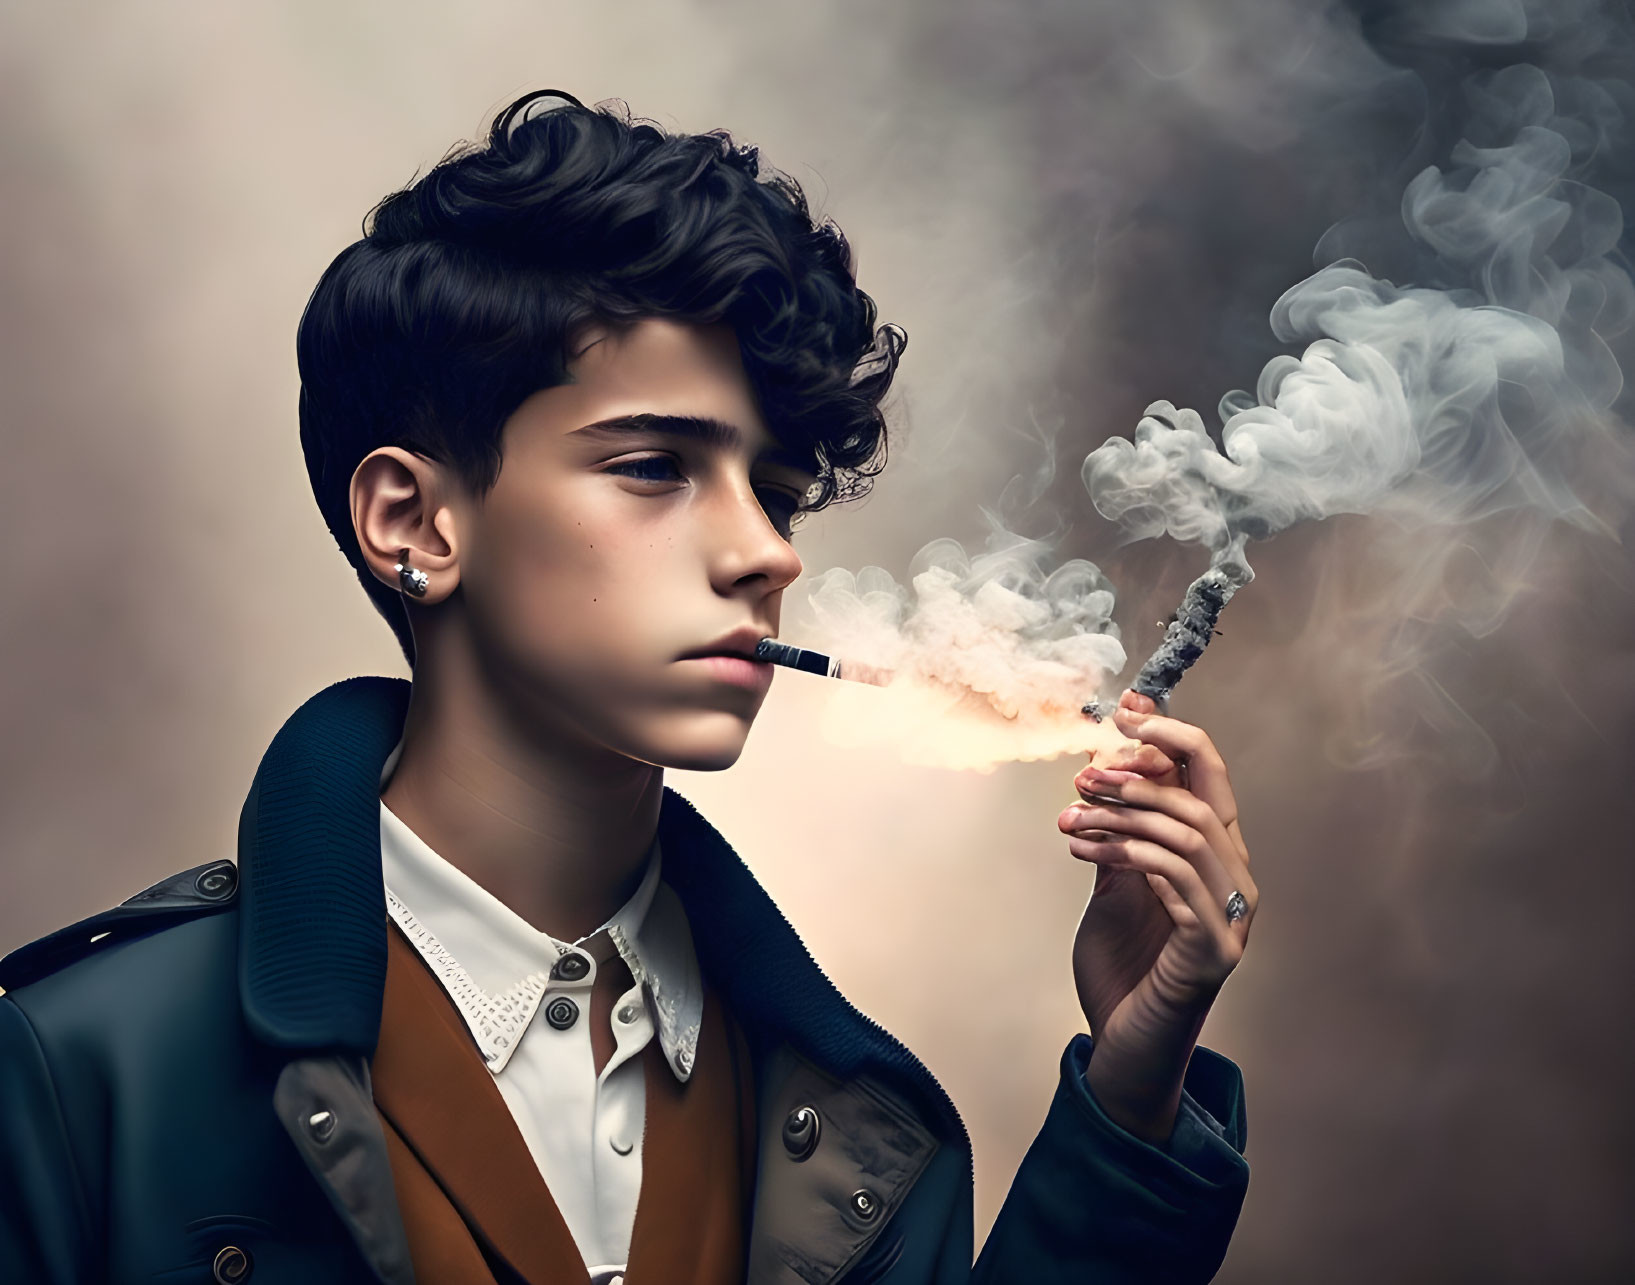 Stylized portrait of young person with curly hair and smoke swirling around.